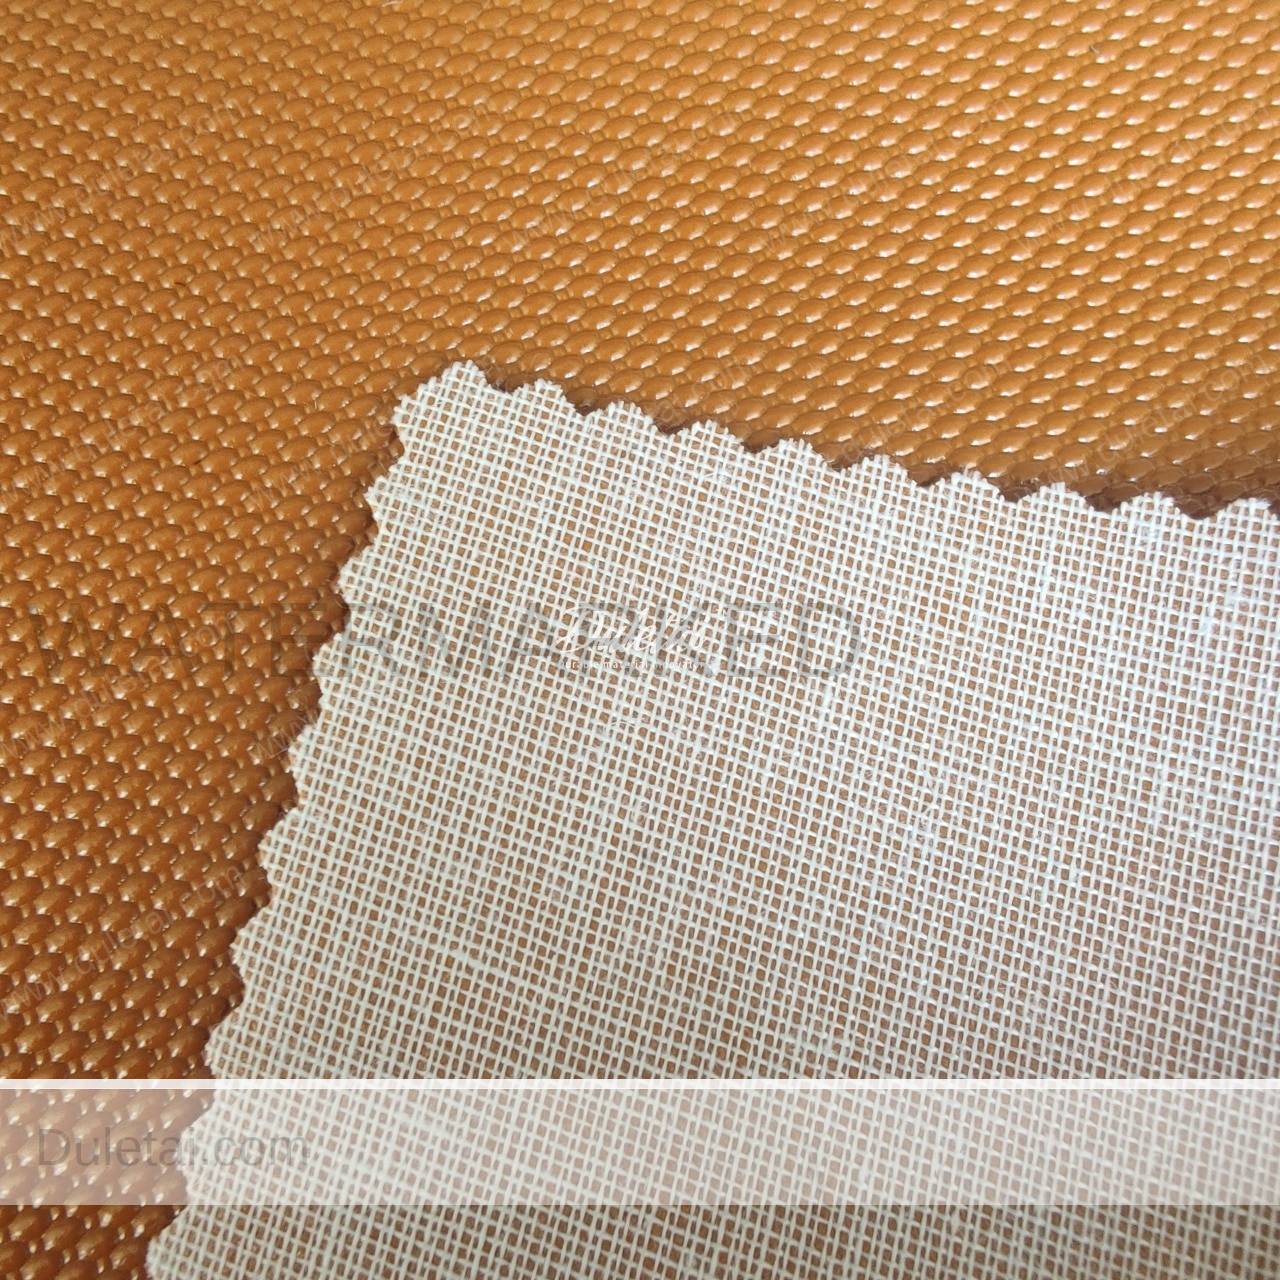 100% High Quality PVC Synthetic Leather PVC Material Leather From